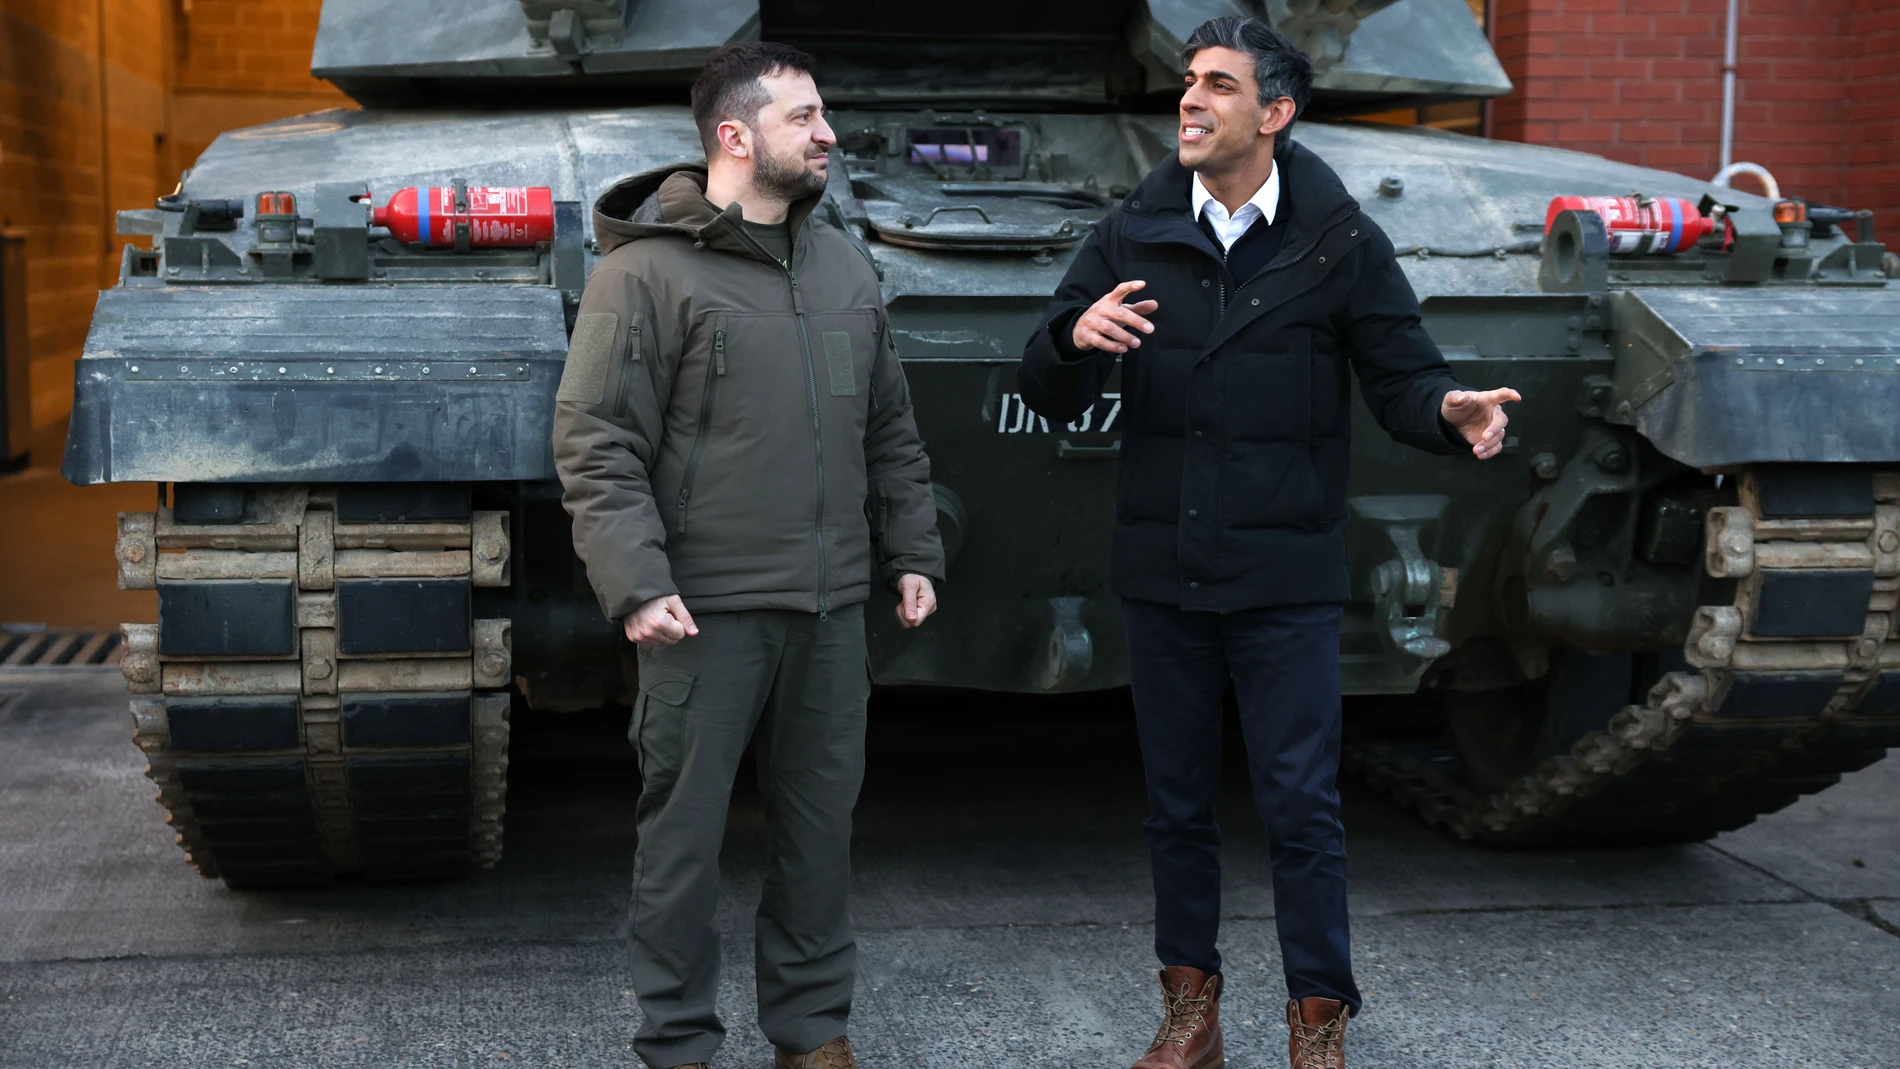 Lulworth Camp (United Kingdom), 08/02/2023.- Ukraine's President Volodymyr Zelensky (L) and British prime minister Rishi Sunak (R) meet with tank crews from Ukraine's armed forces being trained to use a Challenger 2 main battle tank by members of British Army in Lulworth Camp in Lulworth Camp, Britain, 08 February 2023. UK forces trained 10,000 Ukrainian troops in 2022 and aims to assist at least 20,000 more this year, Sunak said in Parliament. (Ucrania, Reino Unido) EFE/EPA/HOLLIE ADAMS / POOL 